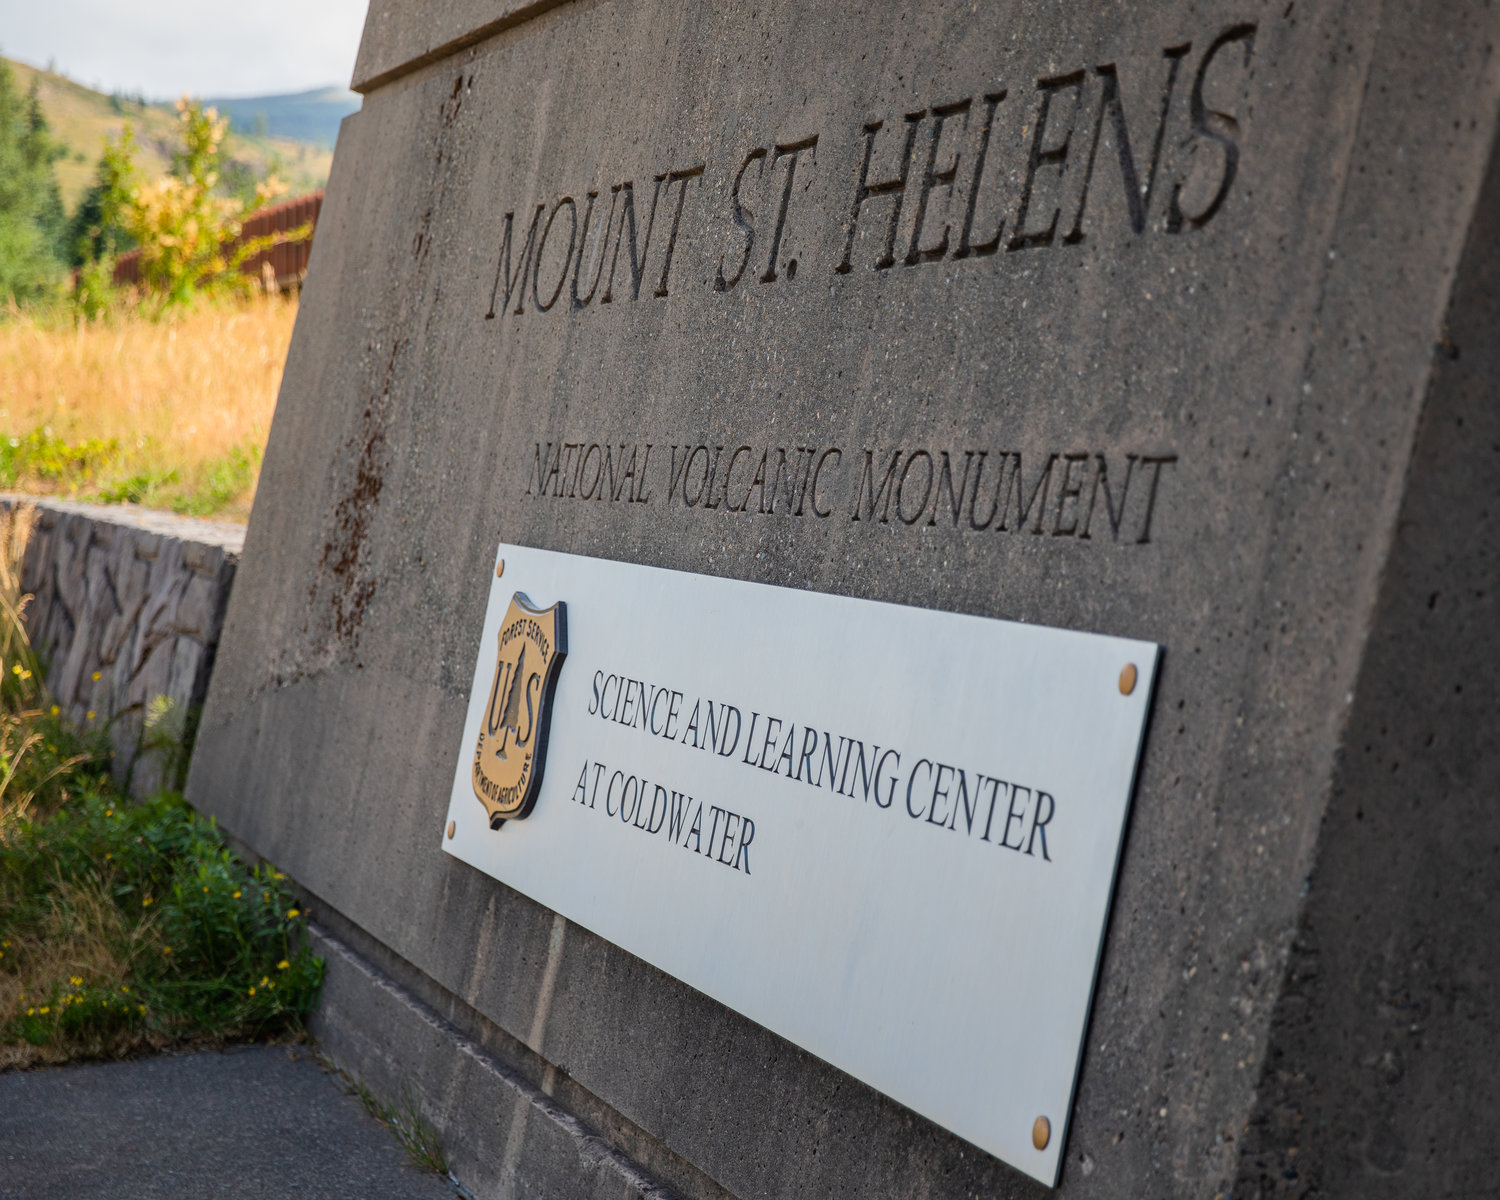 Signage is displayed outside the Mount St. Helens Science and Learning Center at Coldwater.